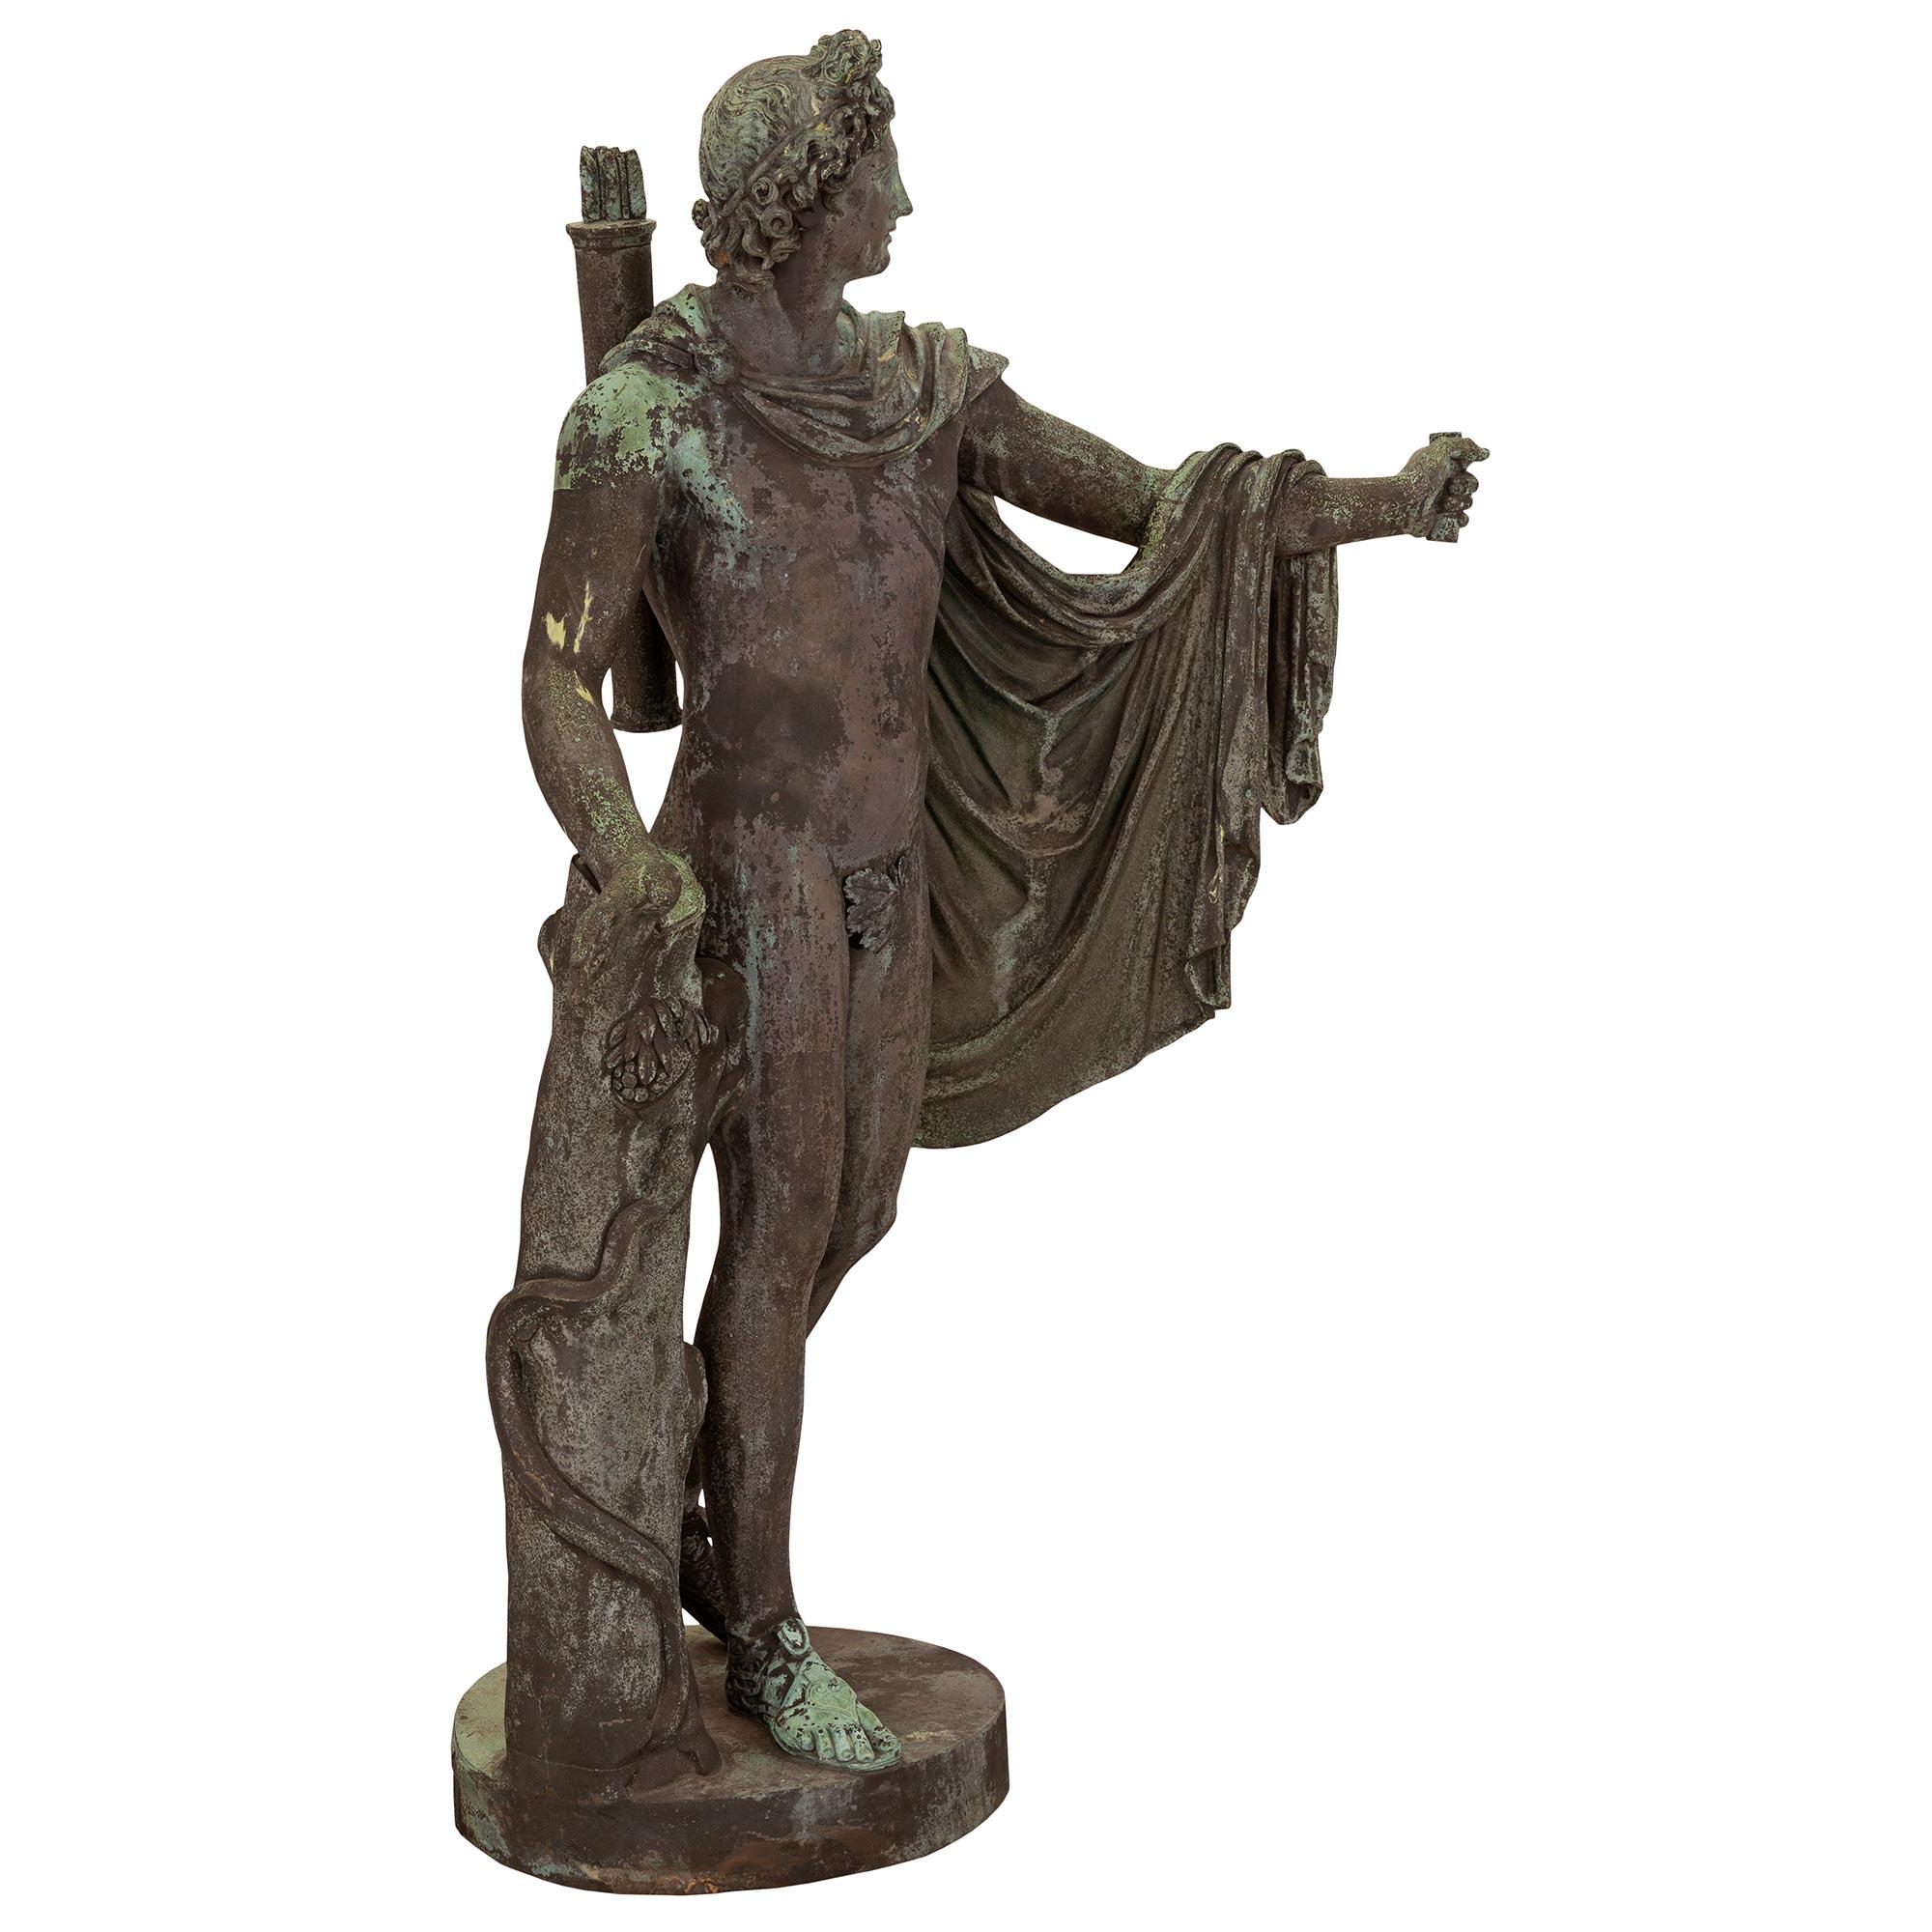 A handsome and high quality Italian 19th century verdigris bronze statue of Apollo. The statue is raised by a circular base with a finely detailed tree trunk. The handsome Apollo is draped in a cape fastened around his neck and draped over his arm.